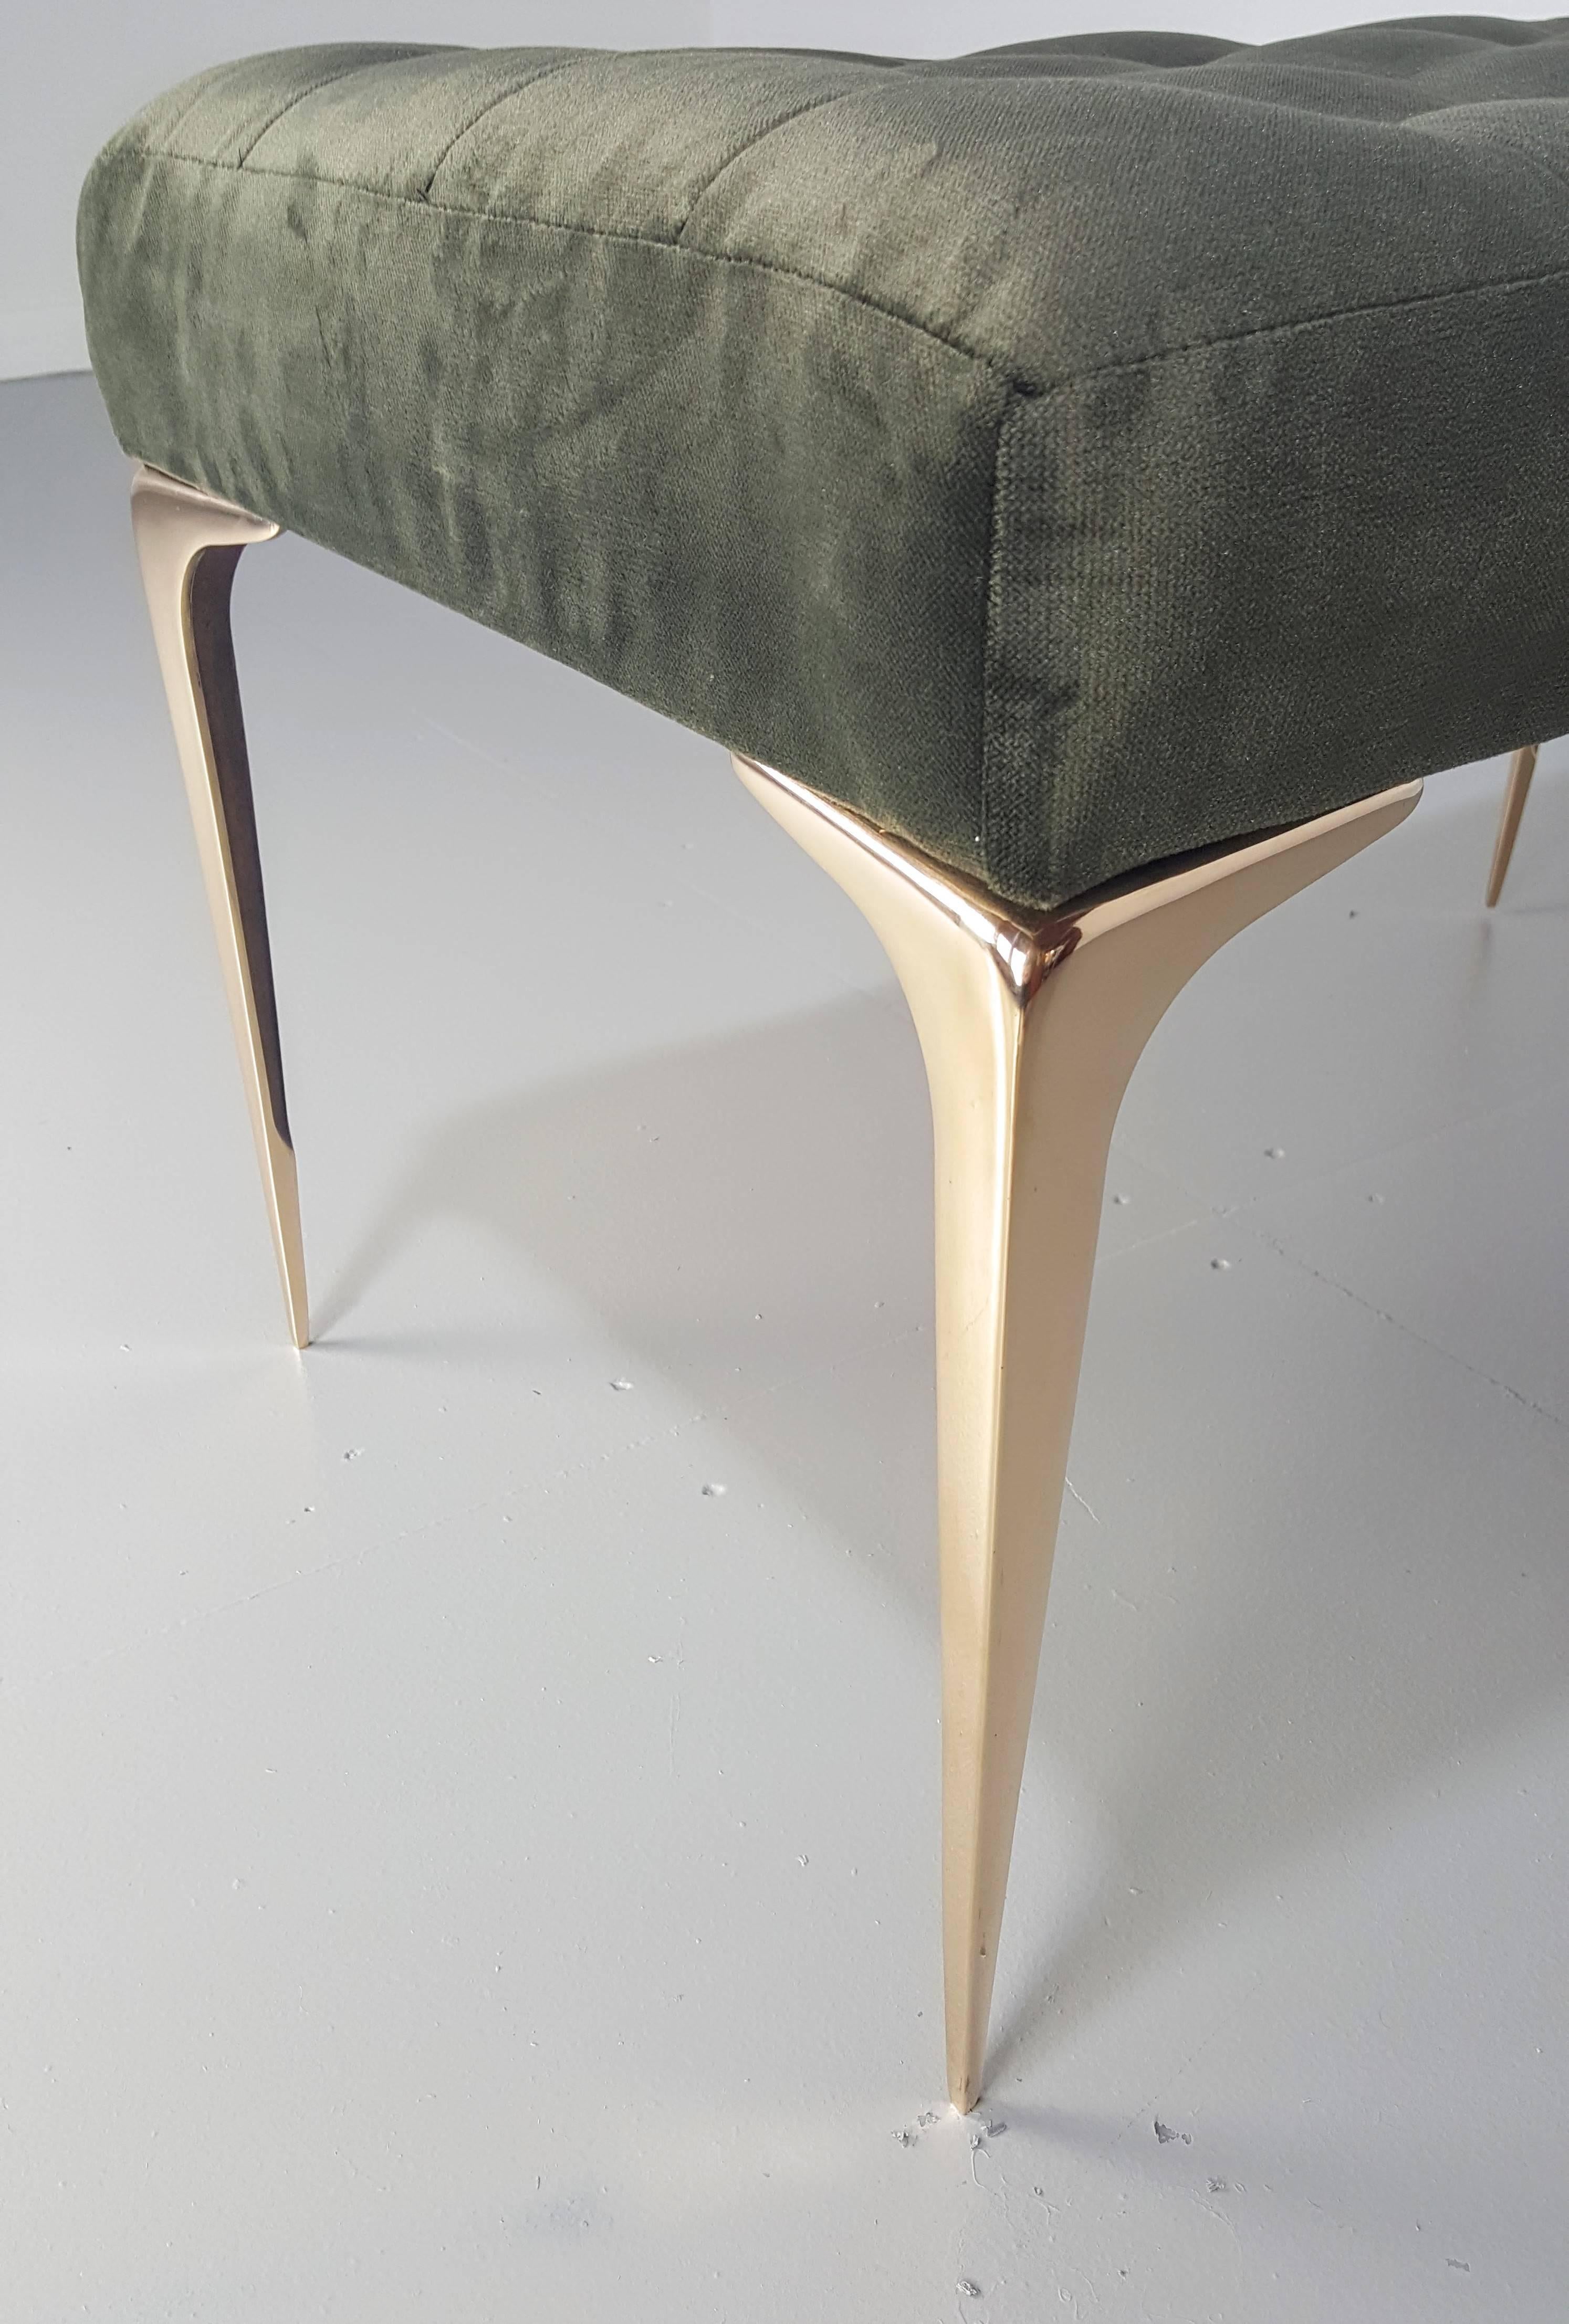 Mid-Century Italian Style Bench with Solid Bronze Tapered Legs in Gray Velvet im Zustand „Hervorragend“ in New York, NY